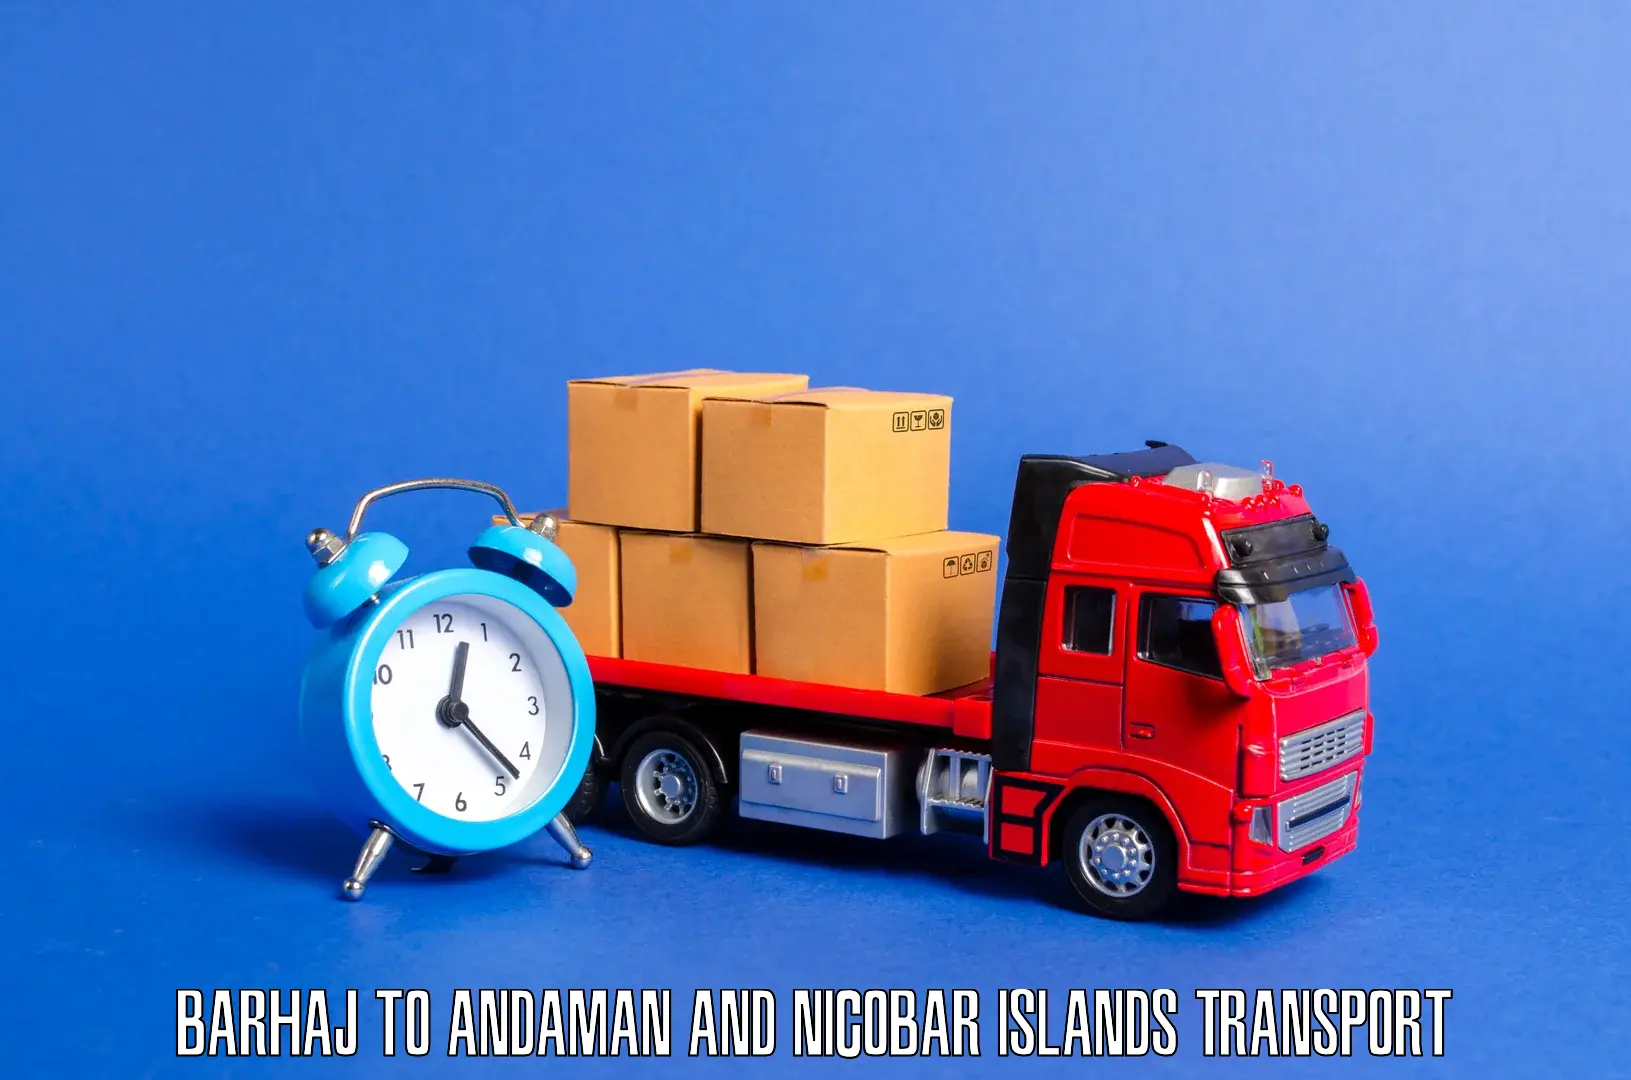 Container transport service Barhaj to Andaman and Nicobar Islands